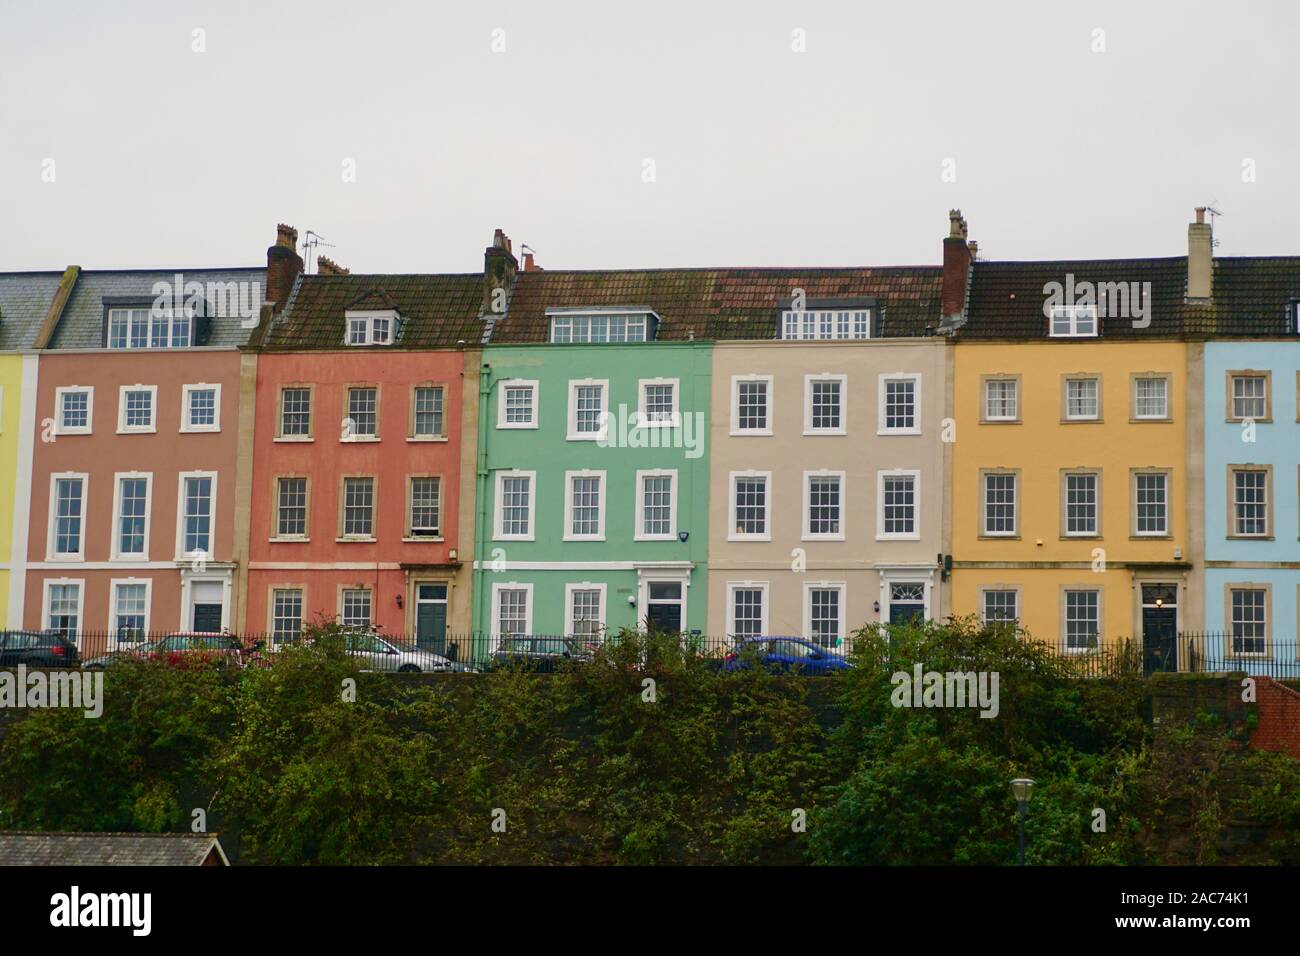 Colourful row of houses in Bristol, England, UK Stock Photo